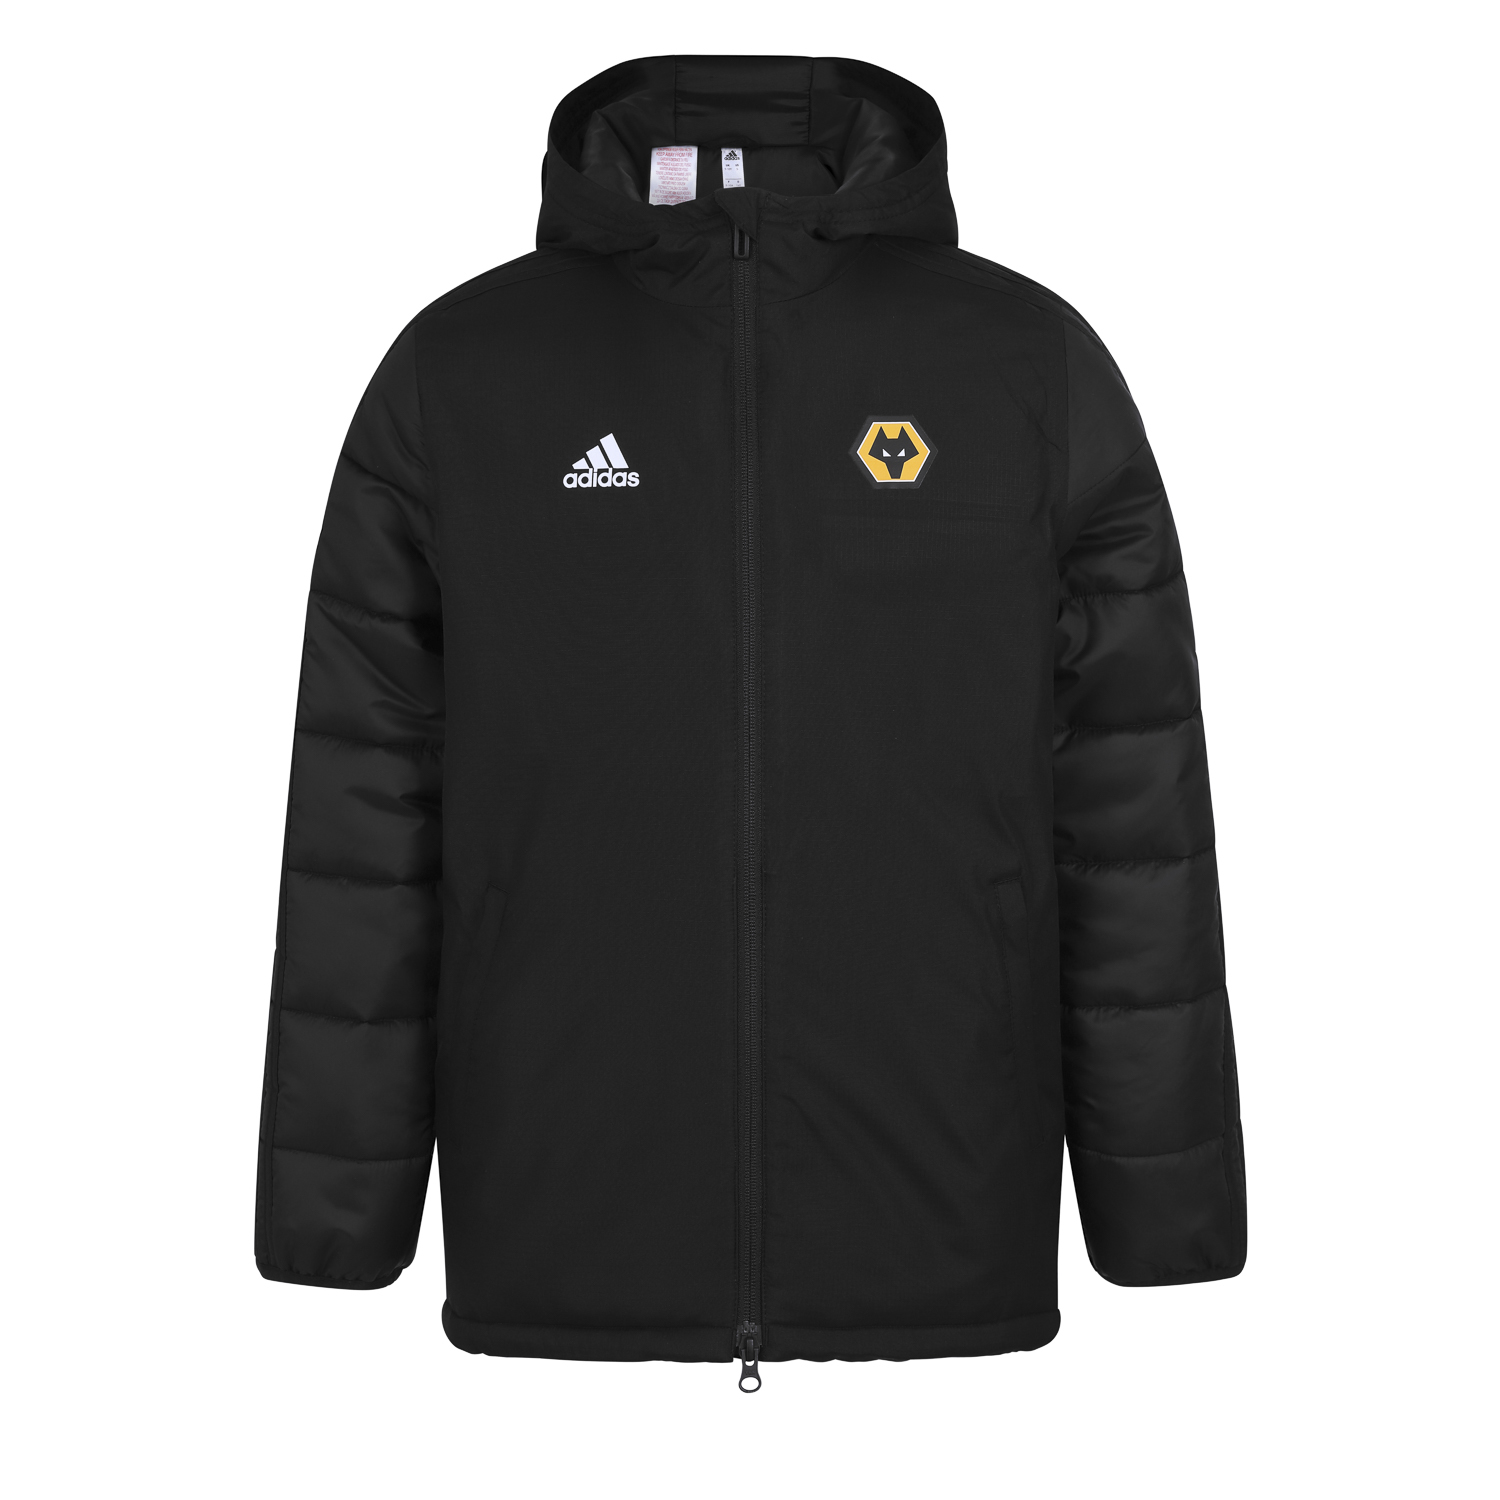 Adult Matchday Winter Jacket